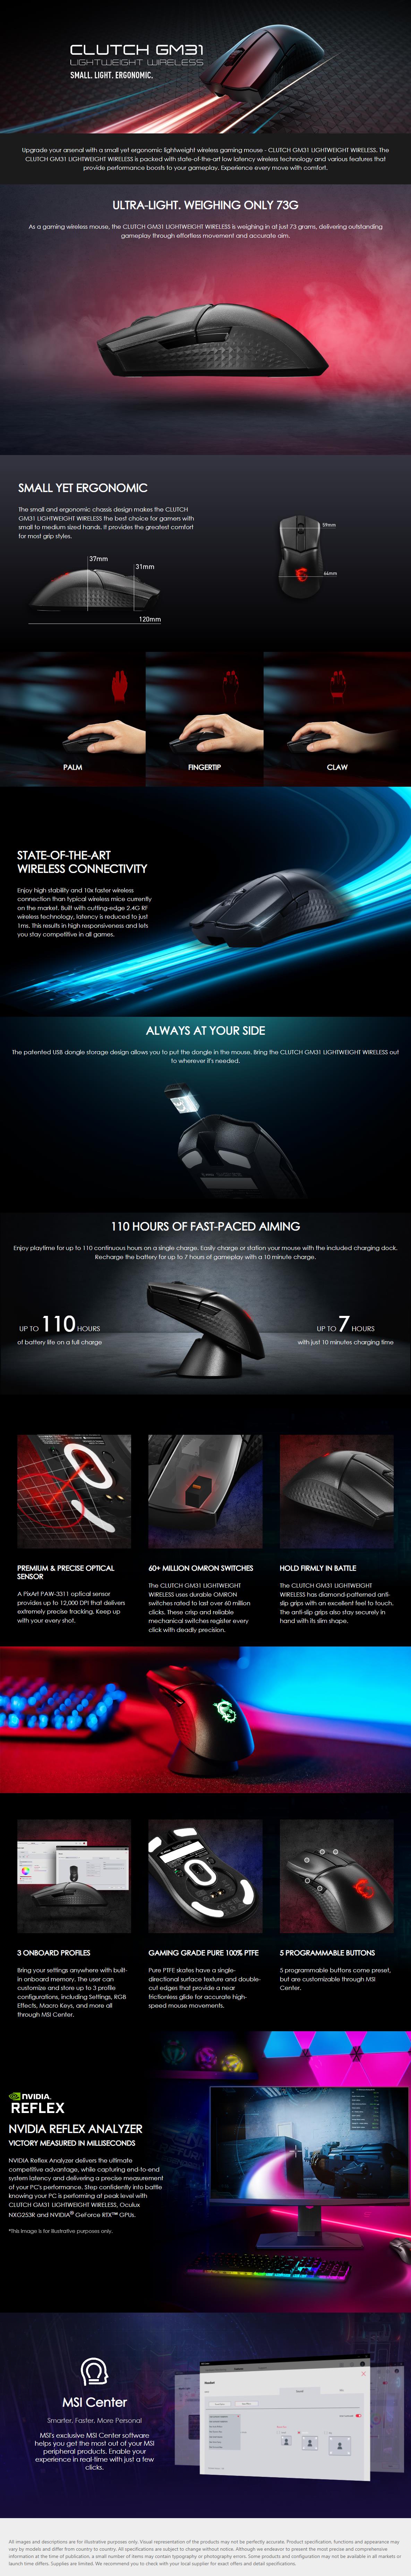 A large marketing image providing additional information about the product MSI Clutch GM31 Lightweight Wireless Gaming Mouse - Additional alt info not provided